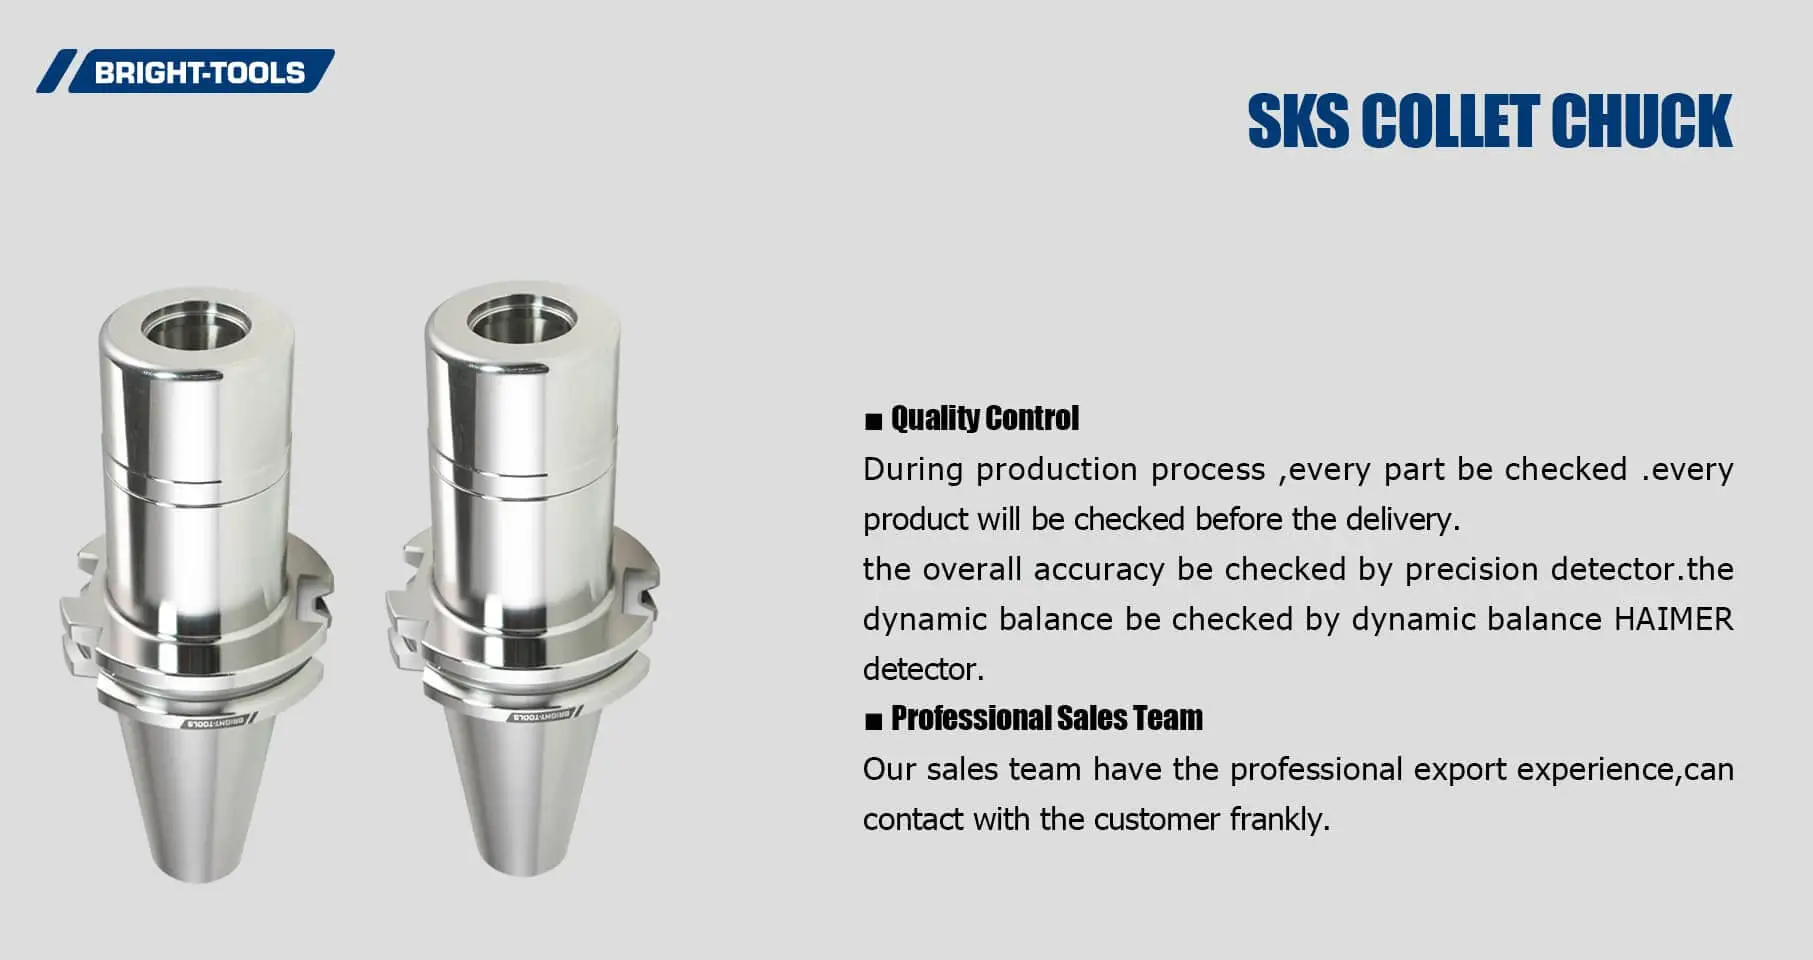 SKS Collet Chuck Of Sk Tool Holders